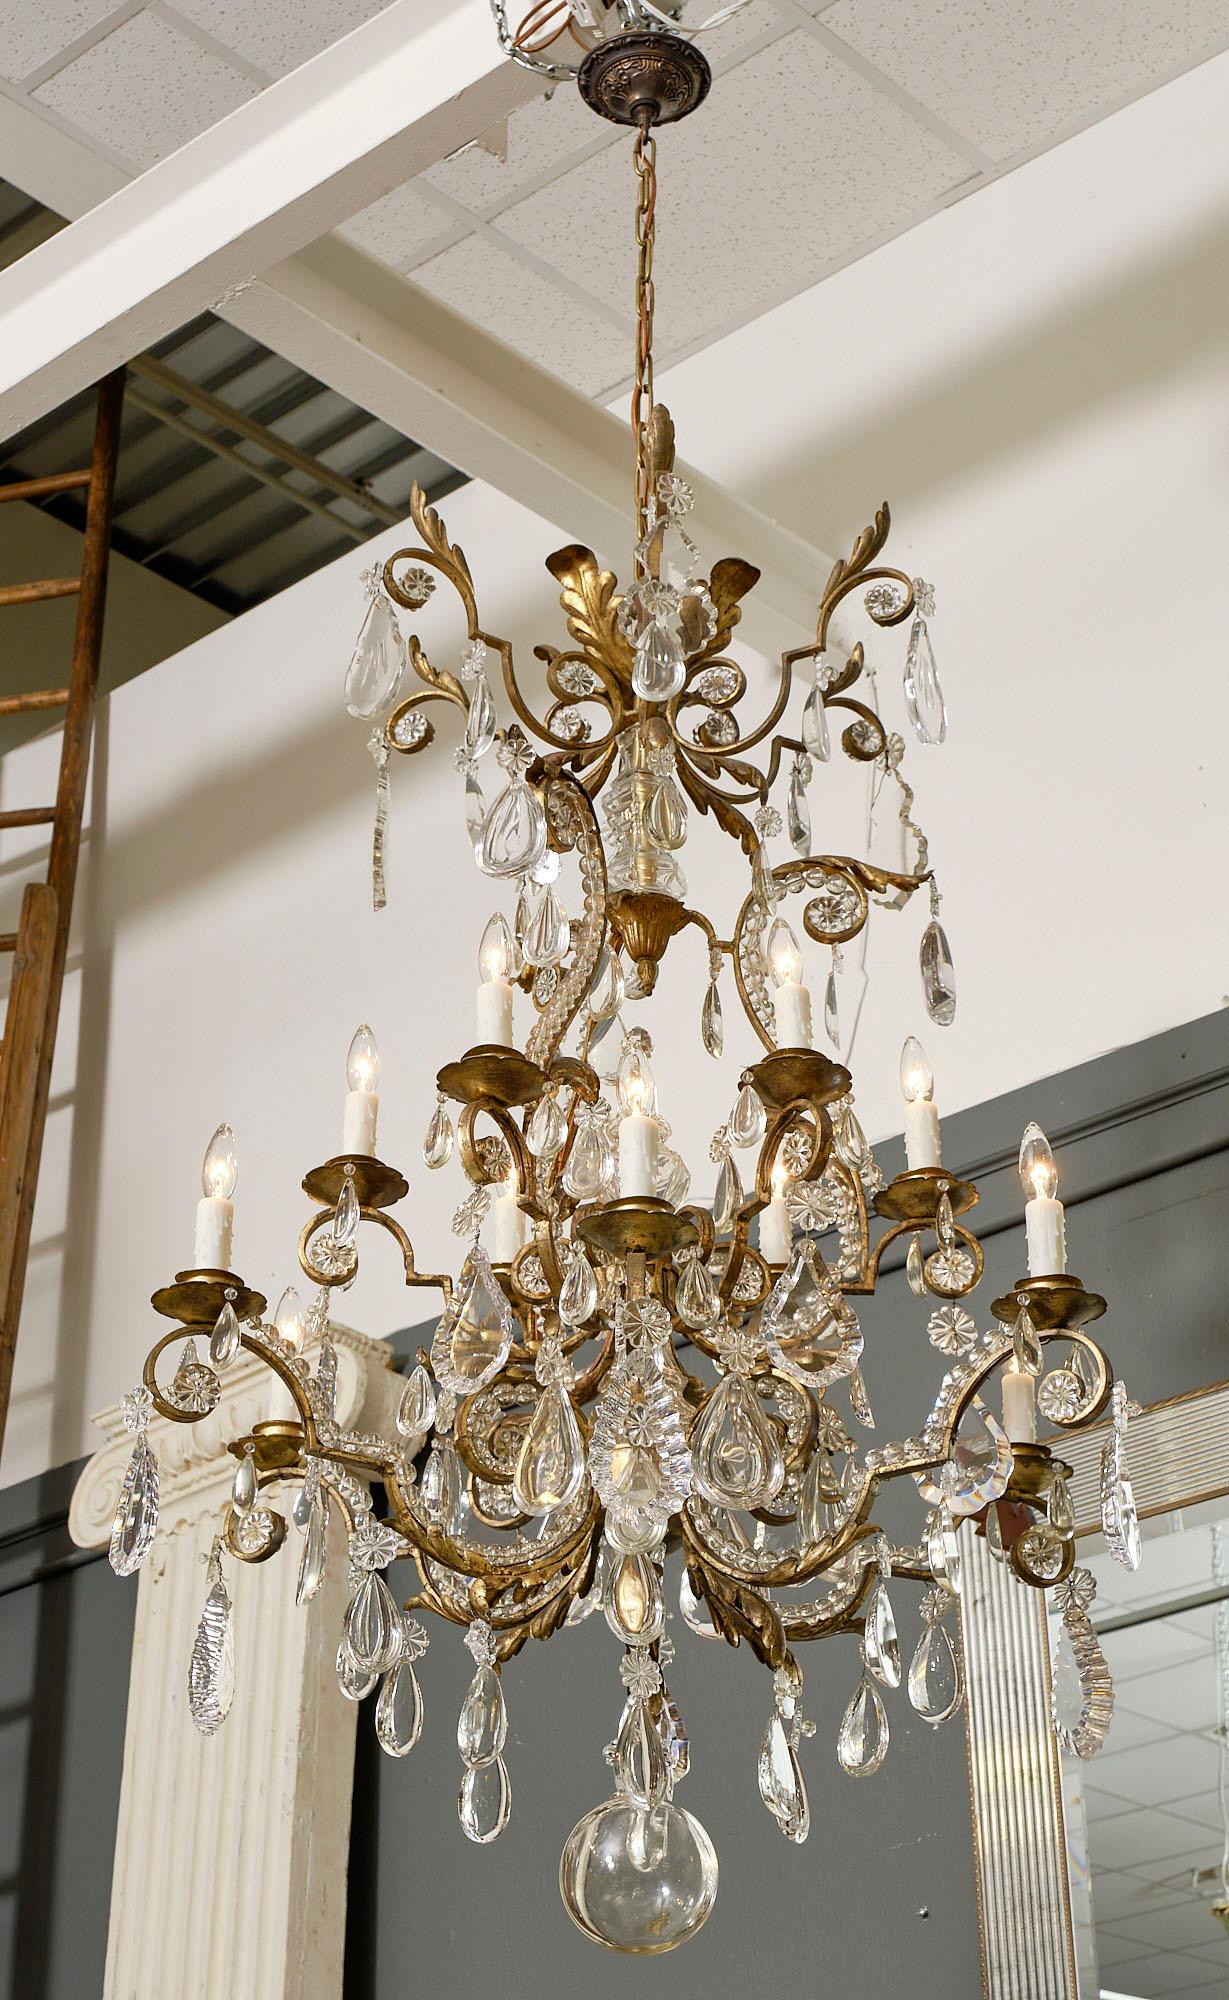 This vintage Baccarat chandelier uses gold leafed and hand hammered iron. This spectacular fixture also features a large array of cut crystal pendants in different sizes and styles as well as beading along the branches. This beautiful chandelier is